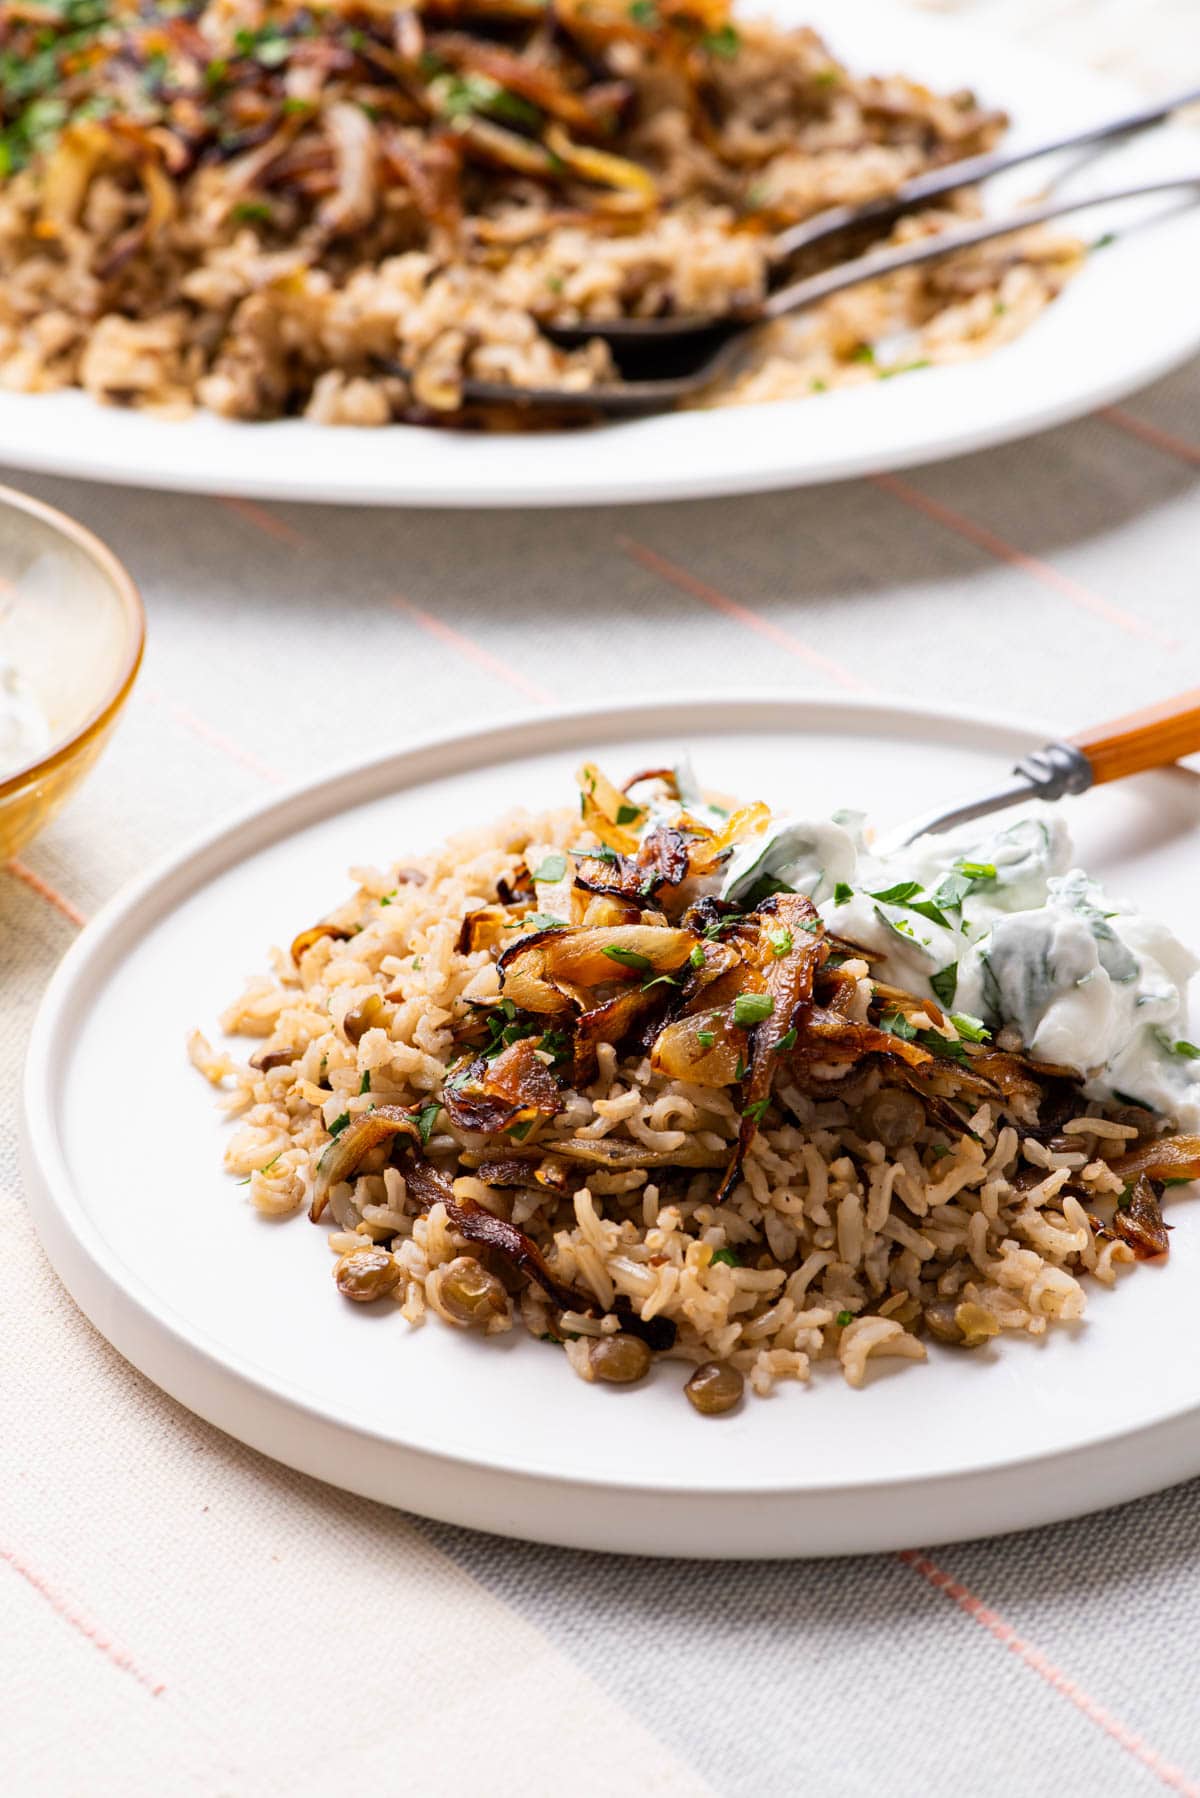 Palestinian Mujadara Recipe (brown rice and lentils with fried onions) on a blue-rimmed platter next to a wooden bowl of yogurt sauce